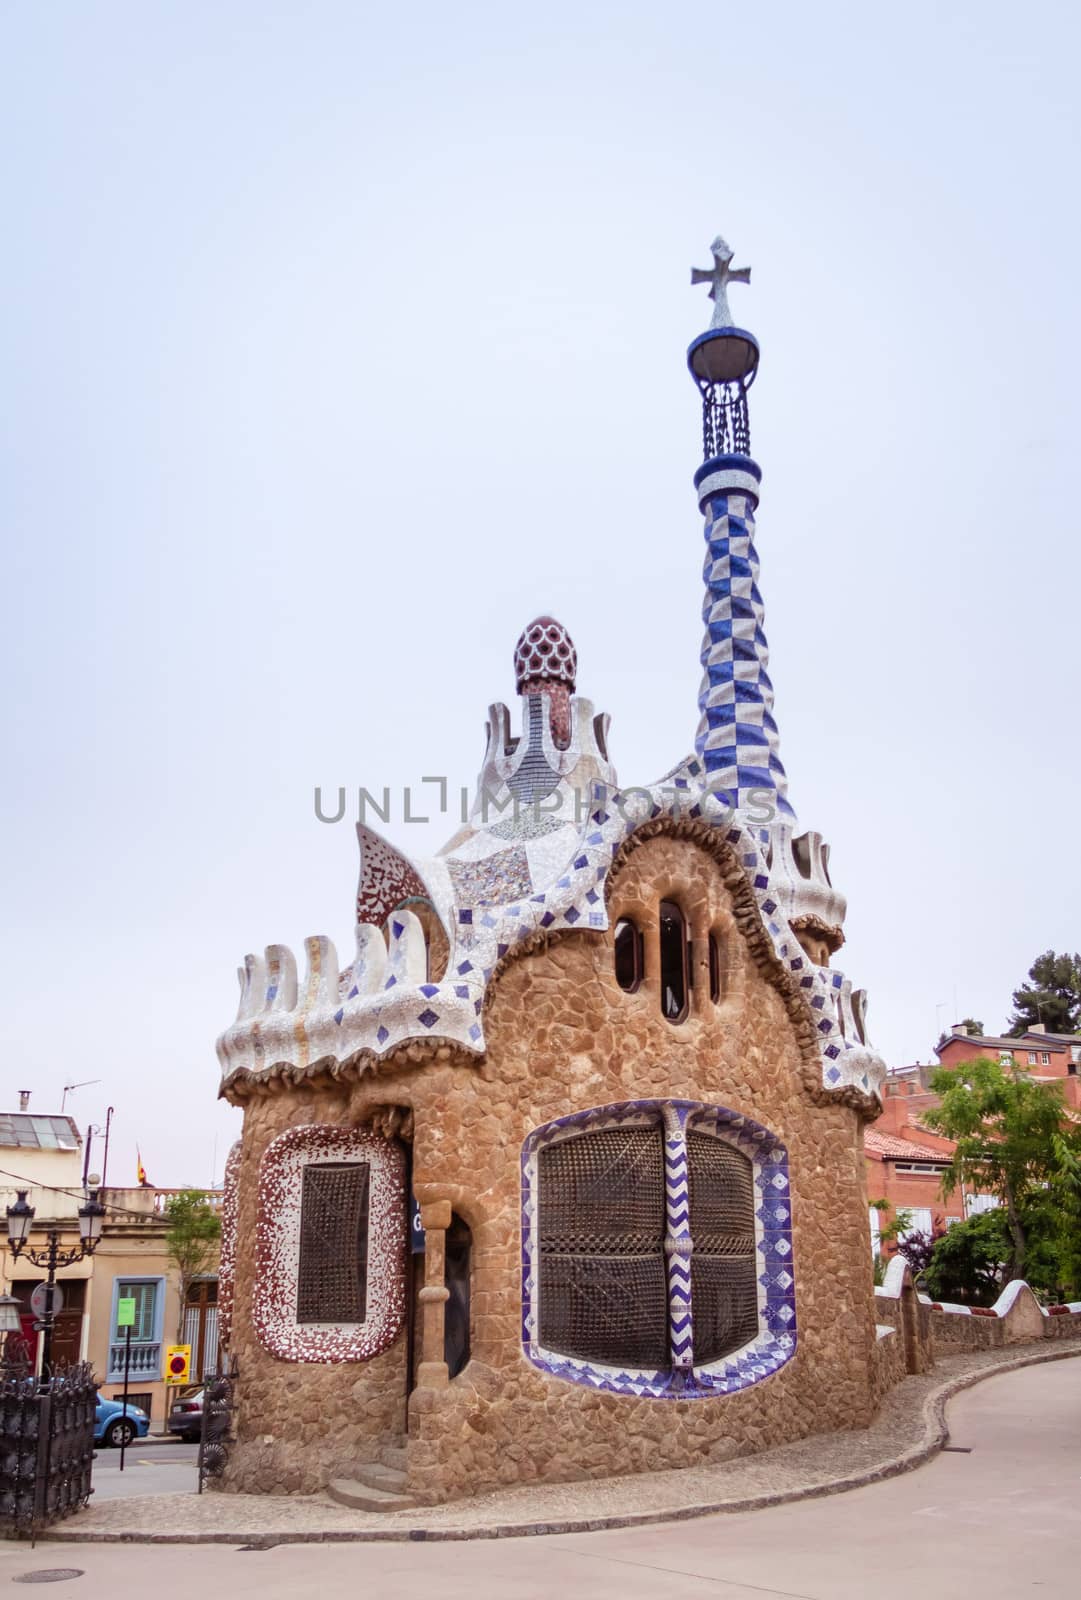 Entrance pavilion of the Park Guell in Barcelona, Spain by doble.d